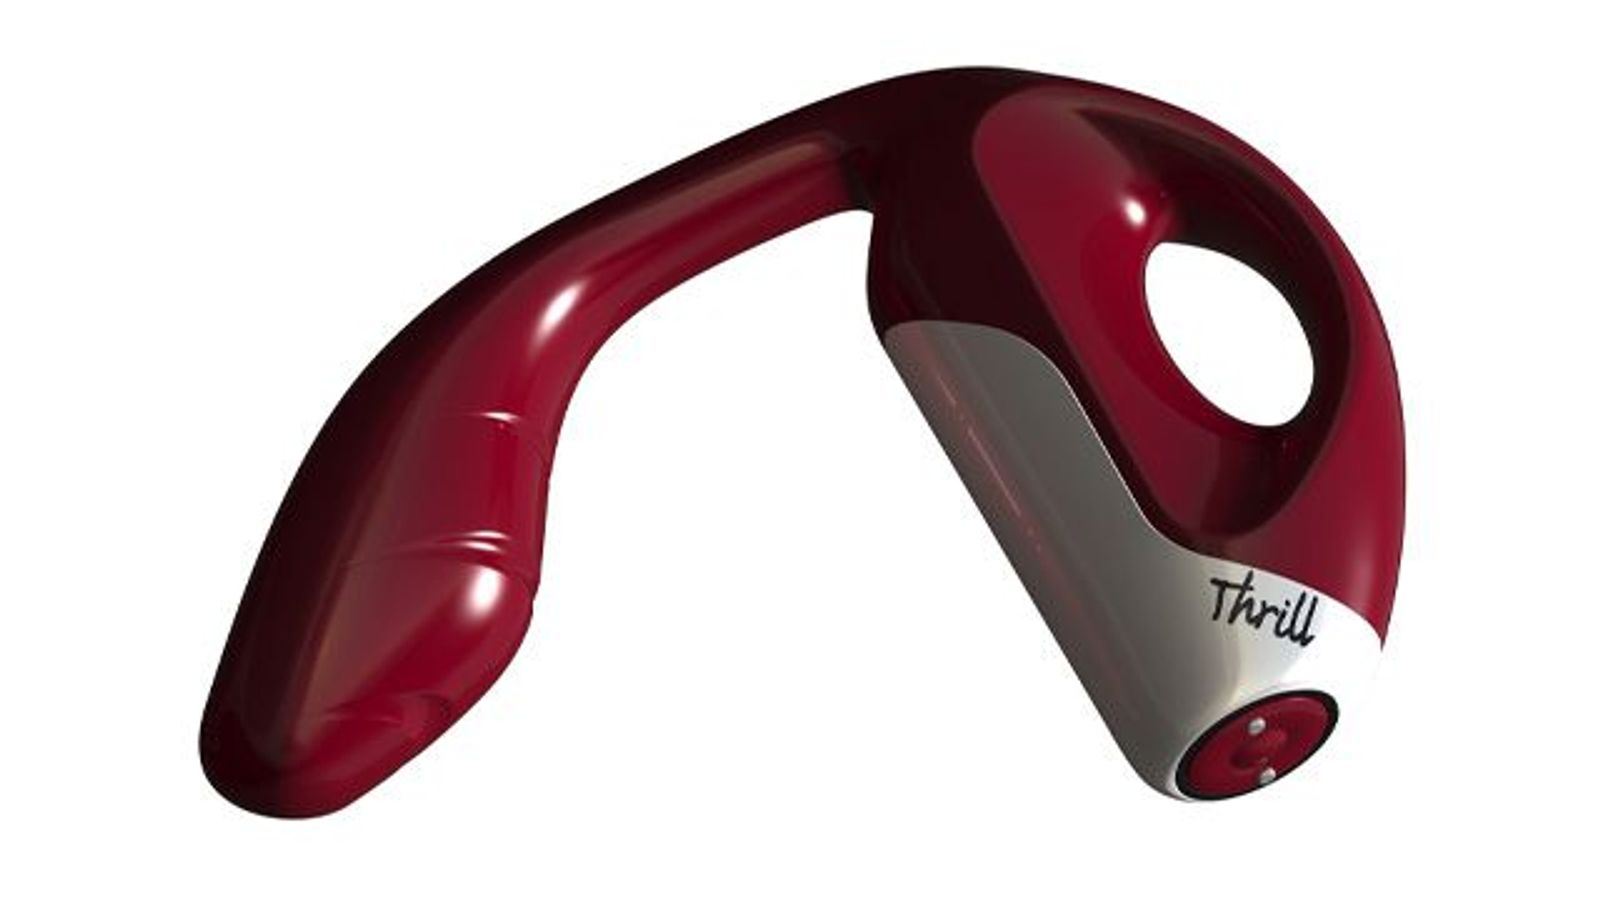 SLS Specialty Debuts Highly Anticipated We-Vibe Thrill Dual-Stim Vibe for Women